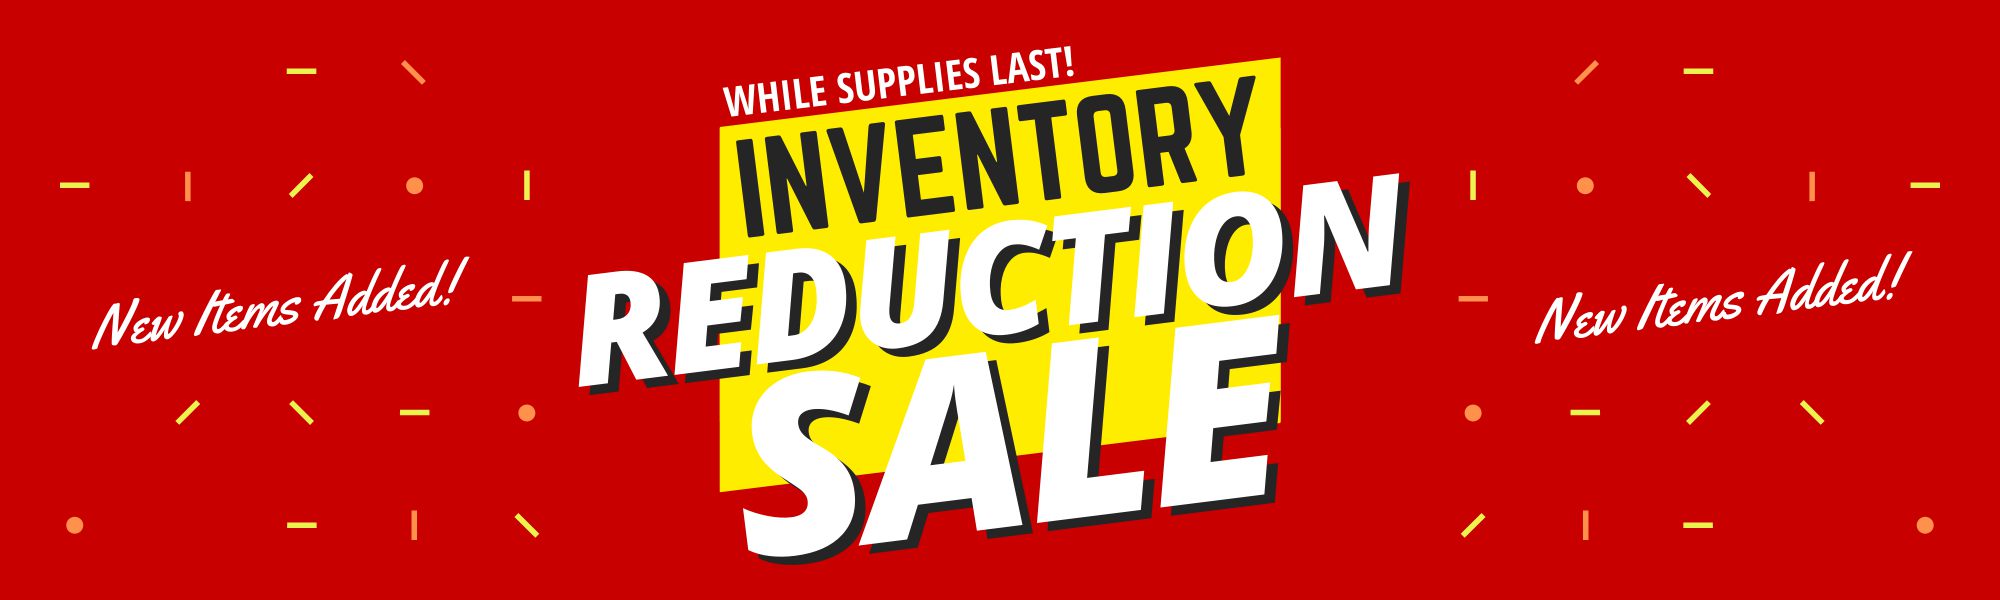 Shop our inventory reduction sale.